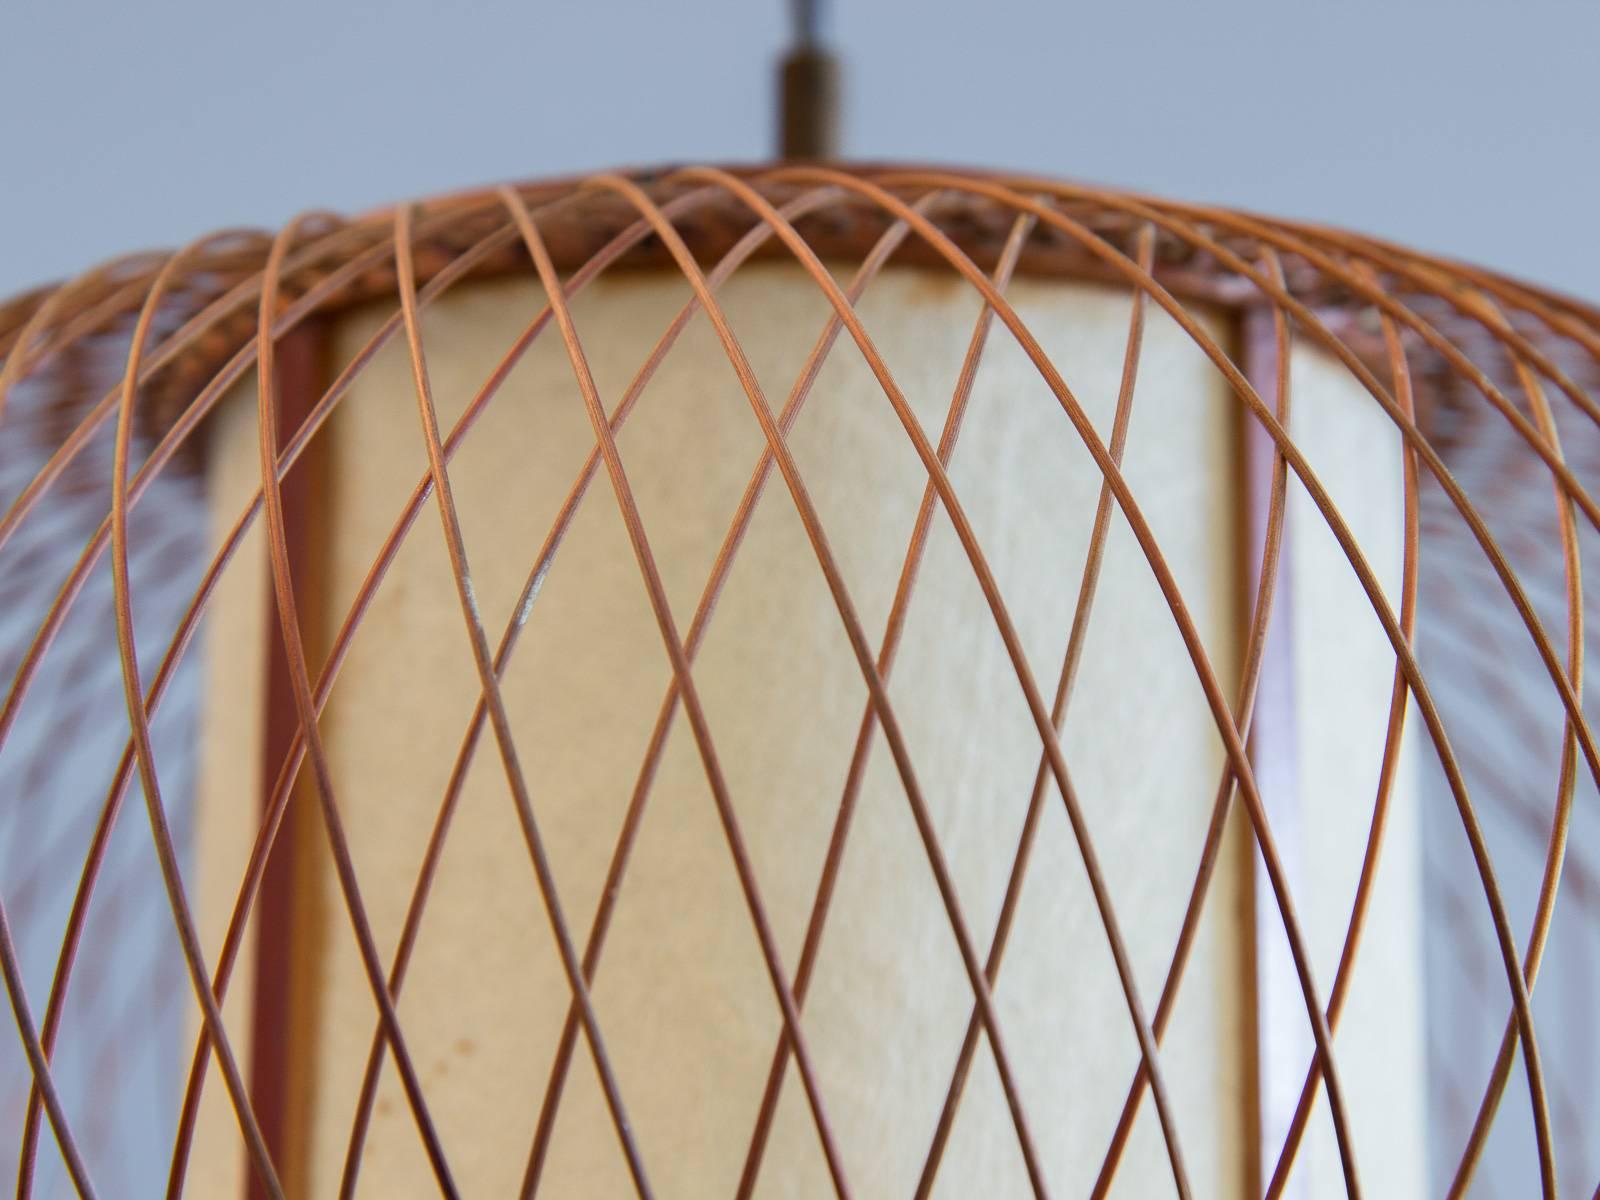 Quietly sophisticated, Japanese woven pendant light. In very good condition and works perfectly. Delicately woven bamboo contrasts the lightly textured, cylindrical cream paper shade within. Elegantly crafted lighting choice. 1960s, made in Japan.